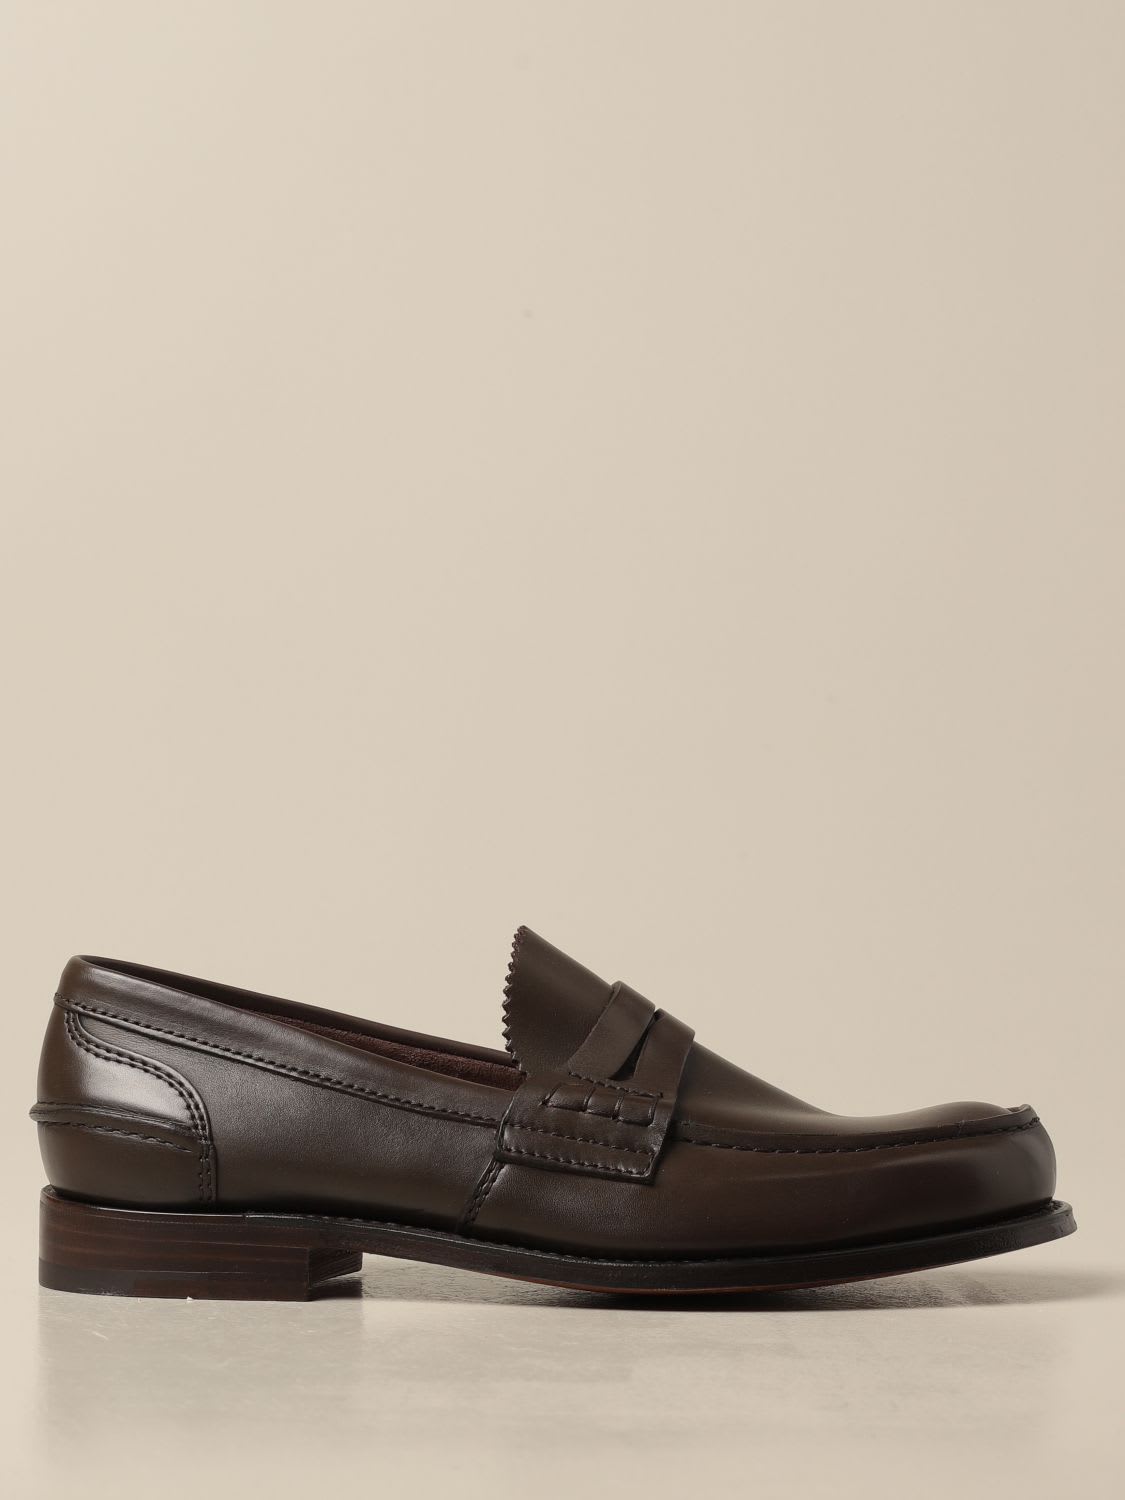 Churchs Loafers Pembrey Churchs Leather Loafers